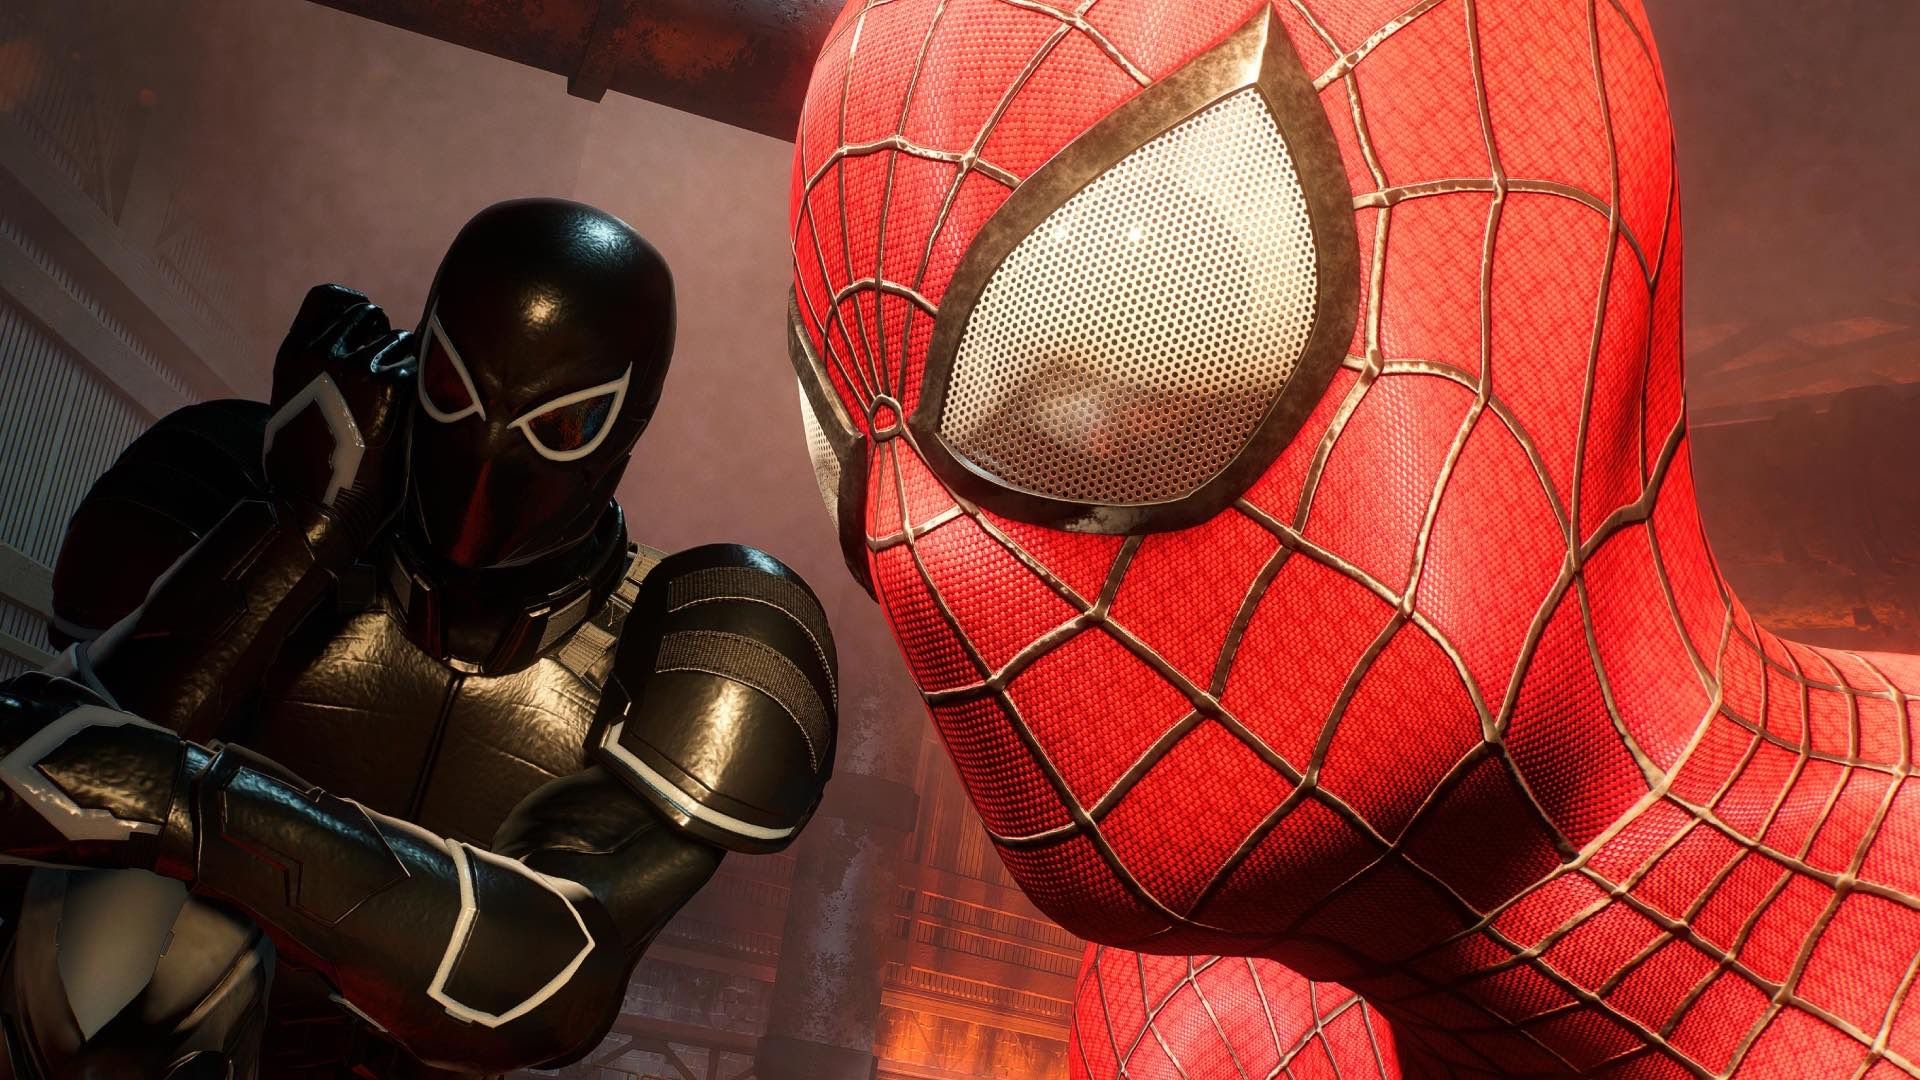 Marvel's Spider-Man 2 Developers Face Ransomware Attack, Data